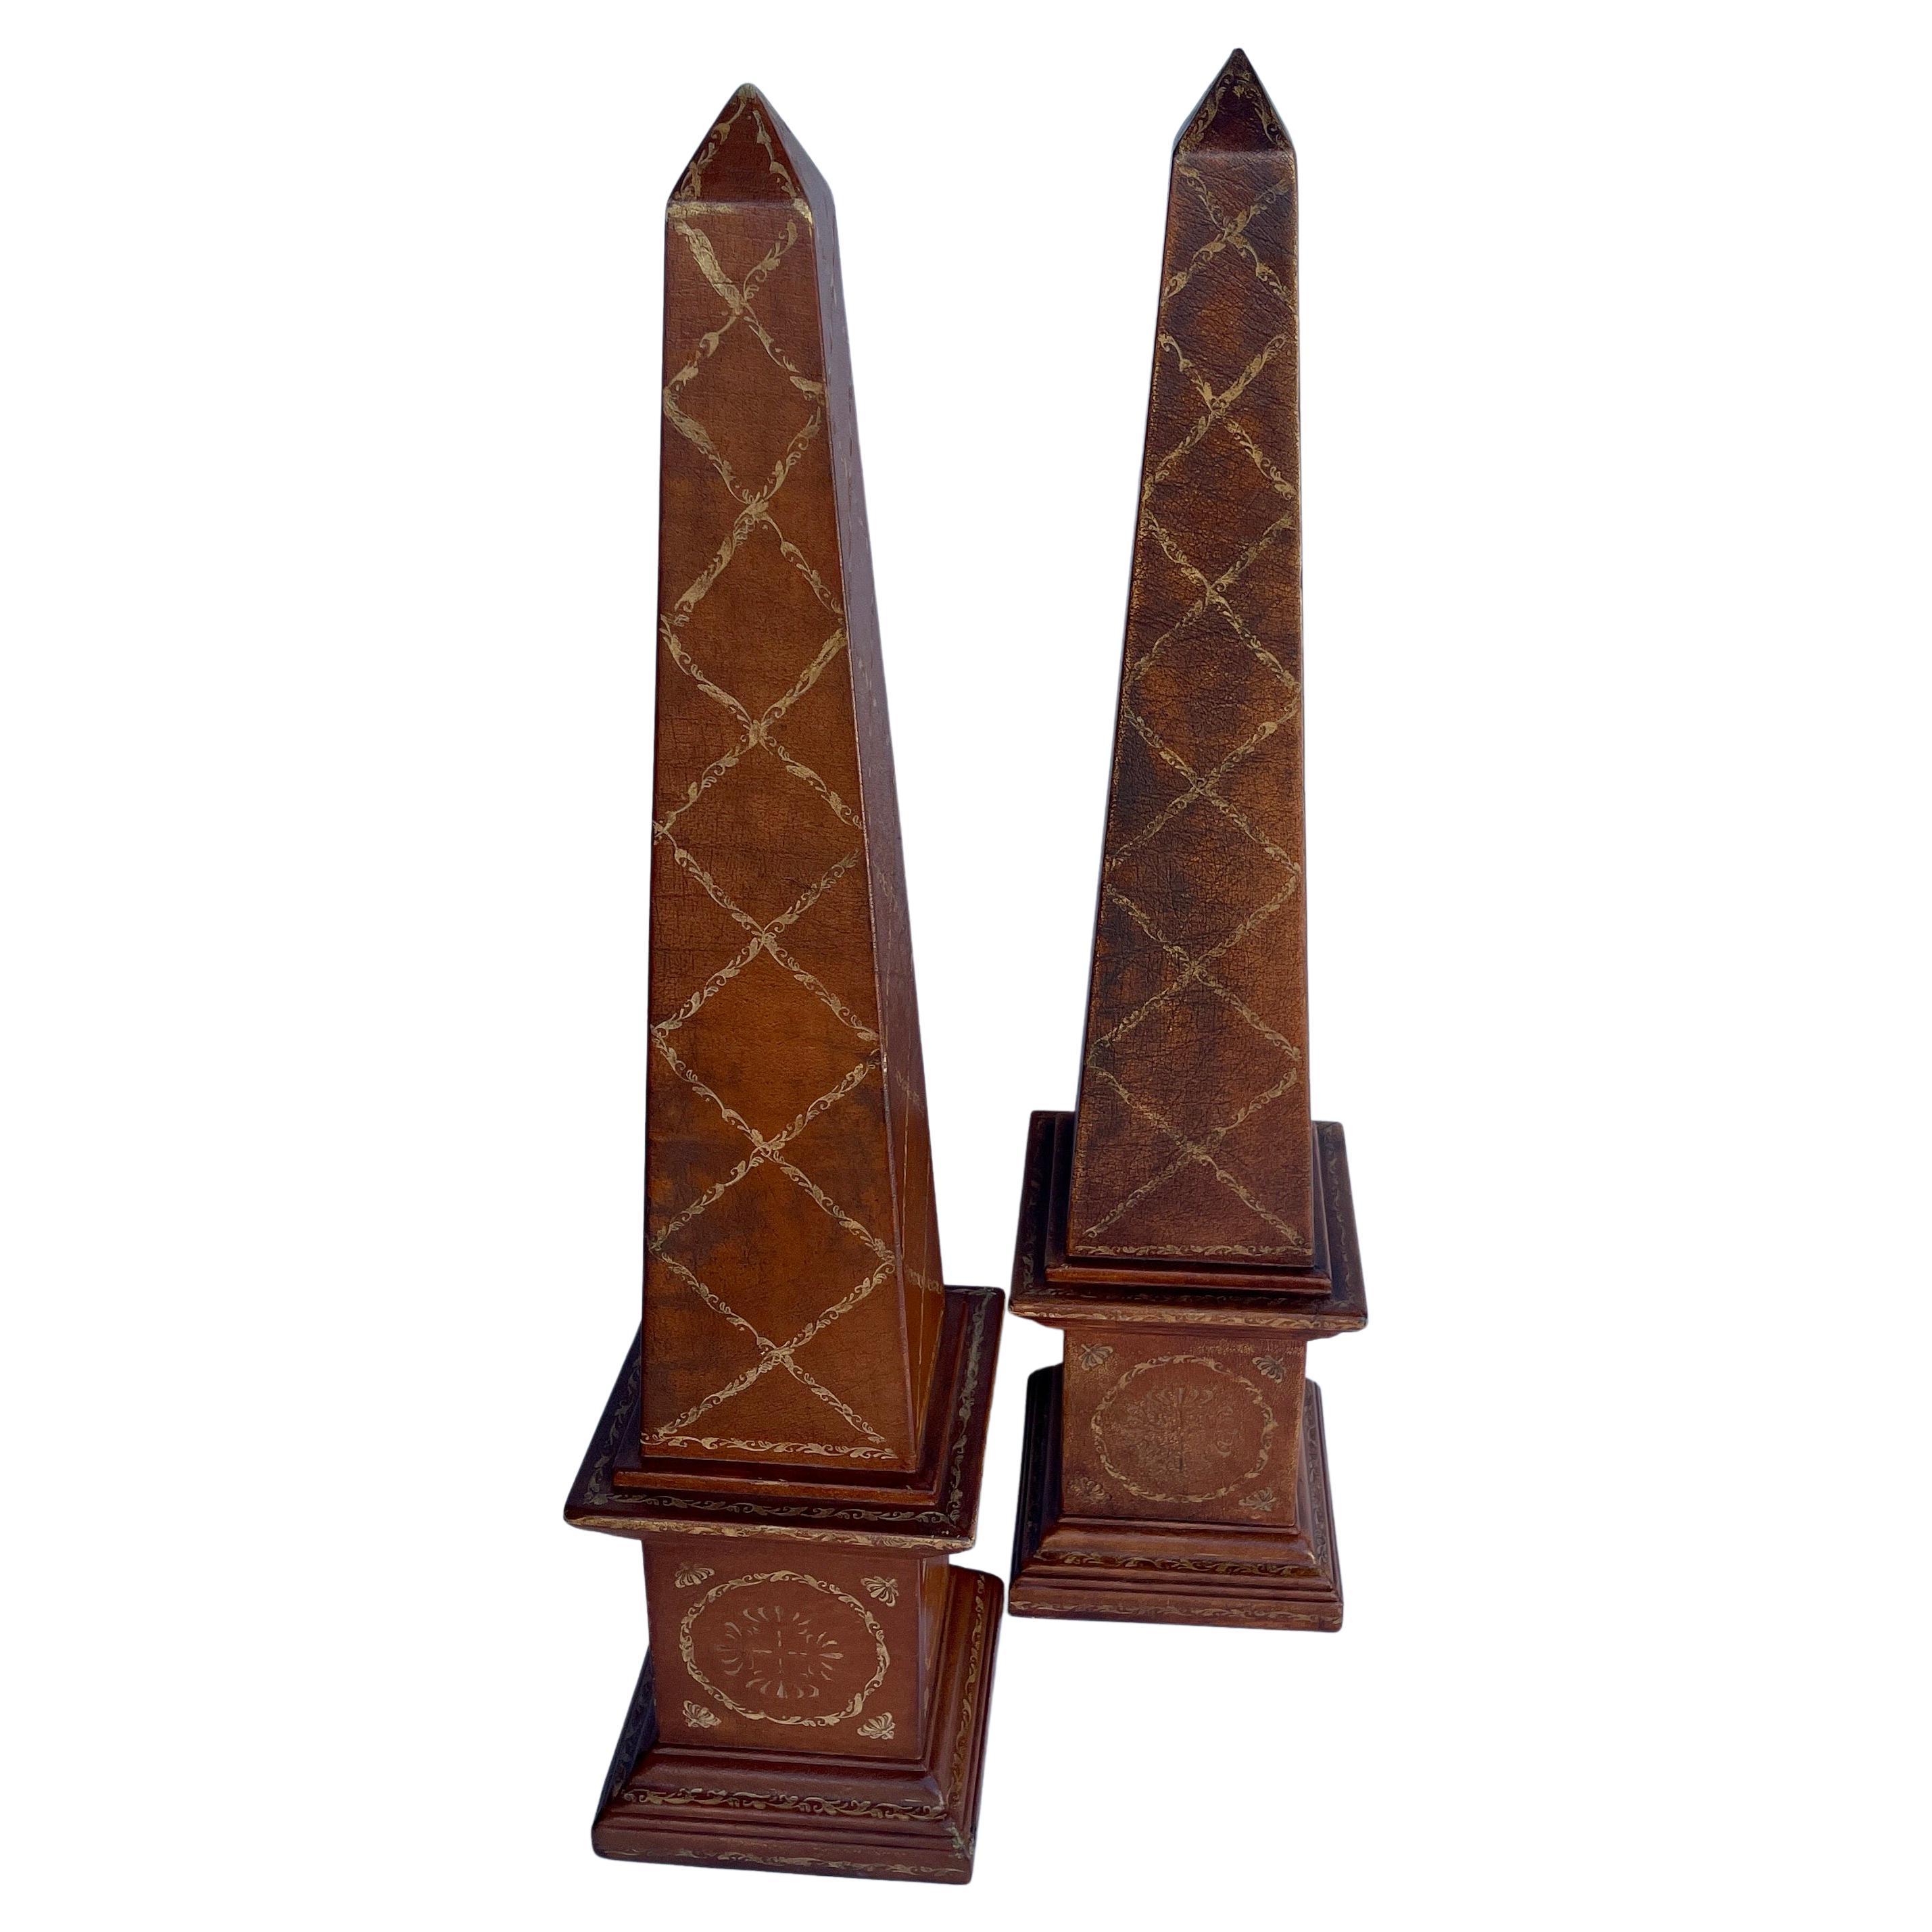 Neoclassical Revival Pair Theodore Alexander Tall Embossed Leather Obelisks by Maitland Smith